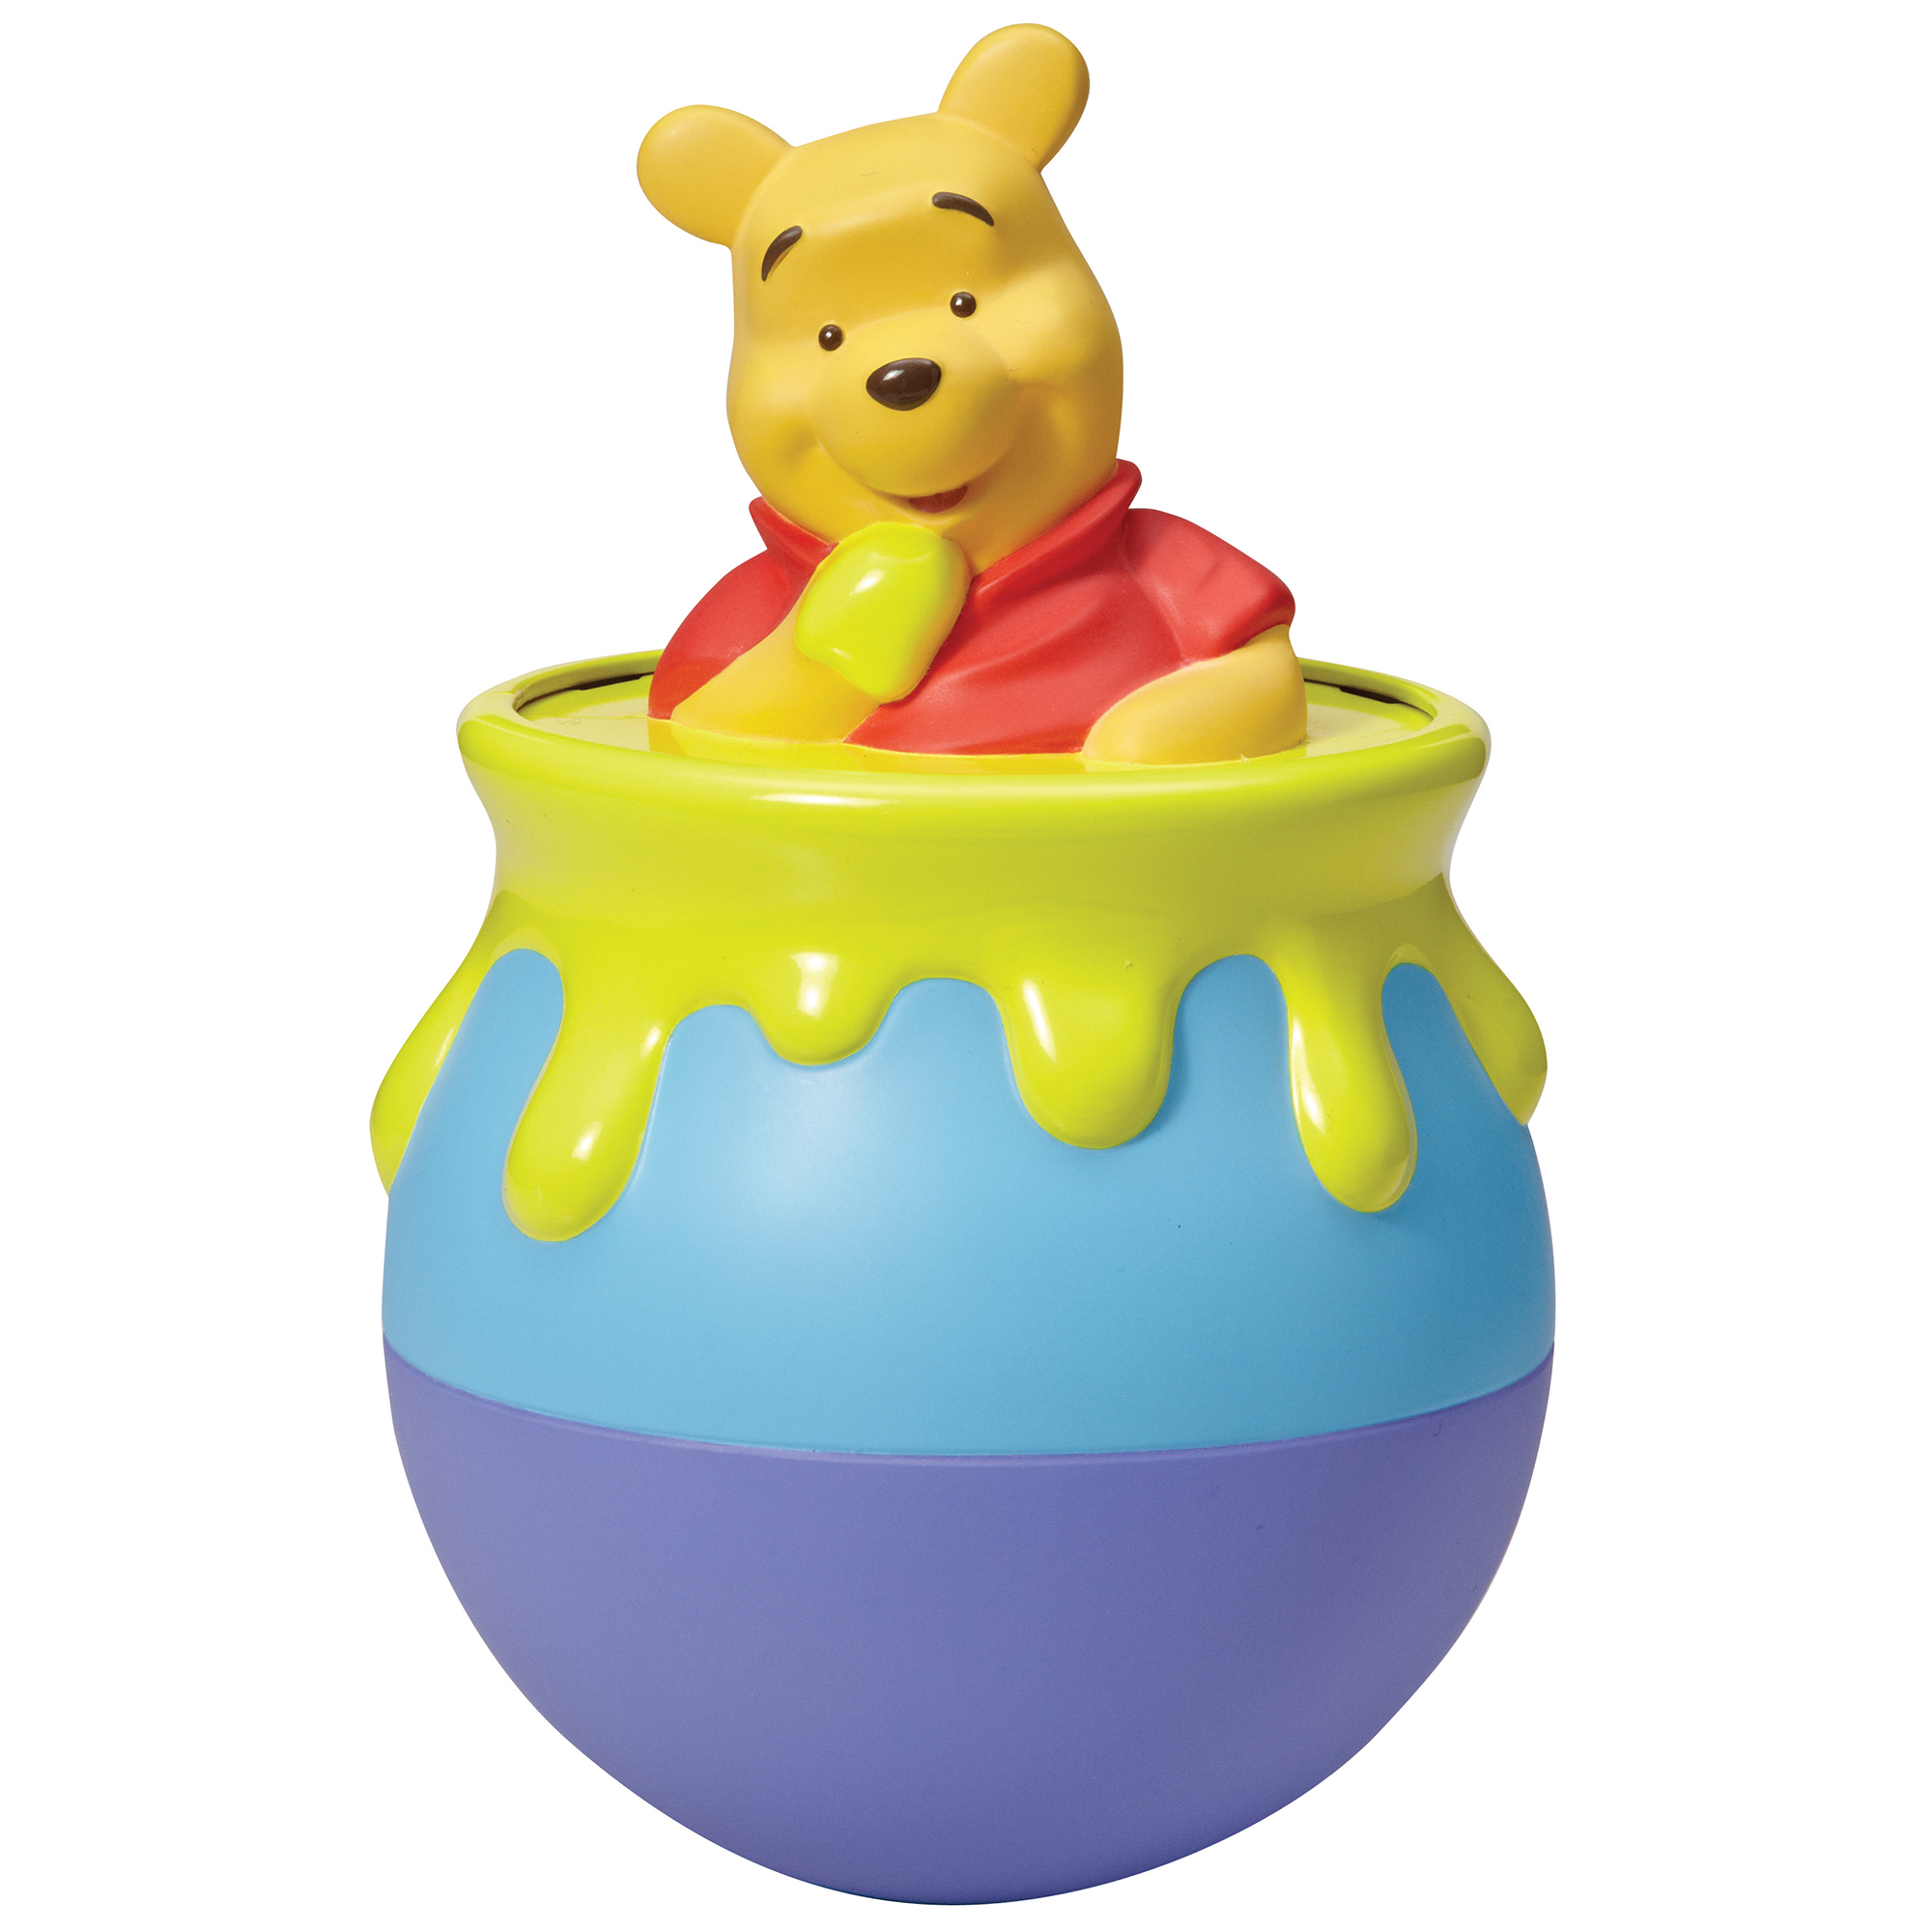 Disney Winnie the Pooh Roly Poly Pooh